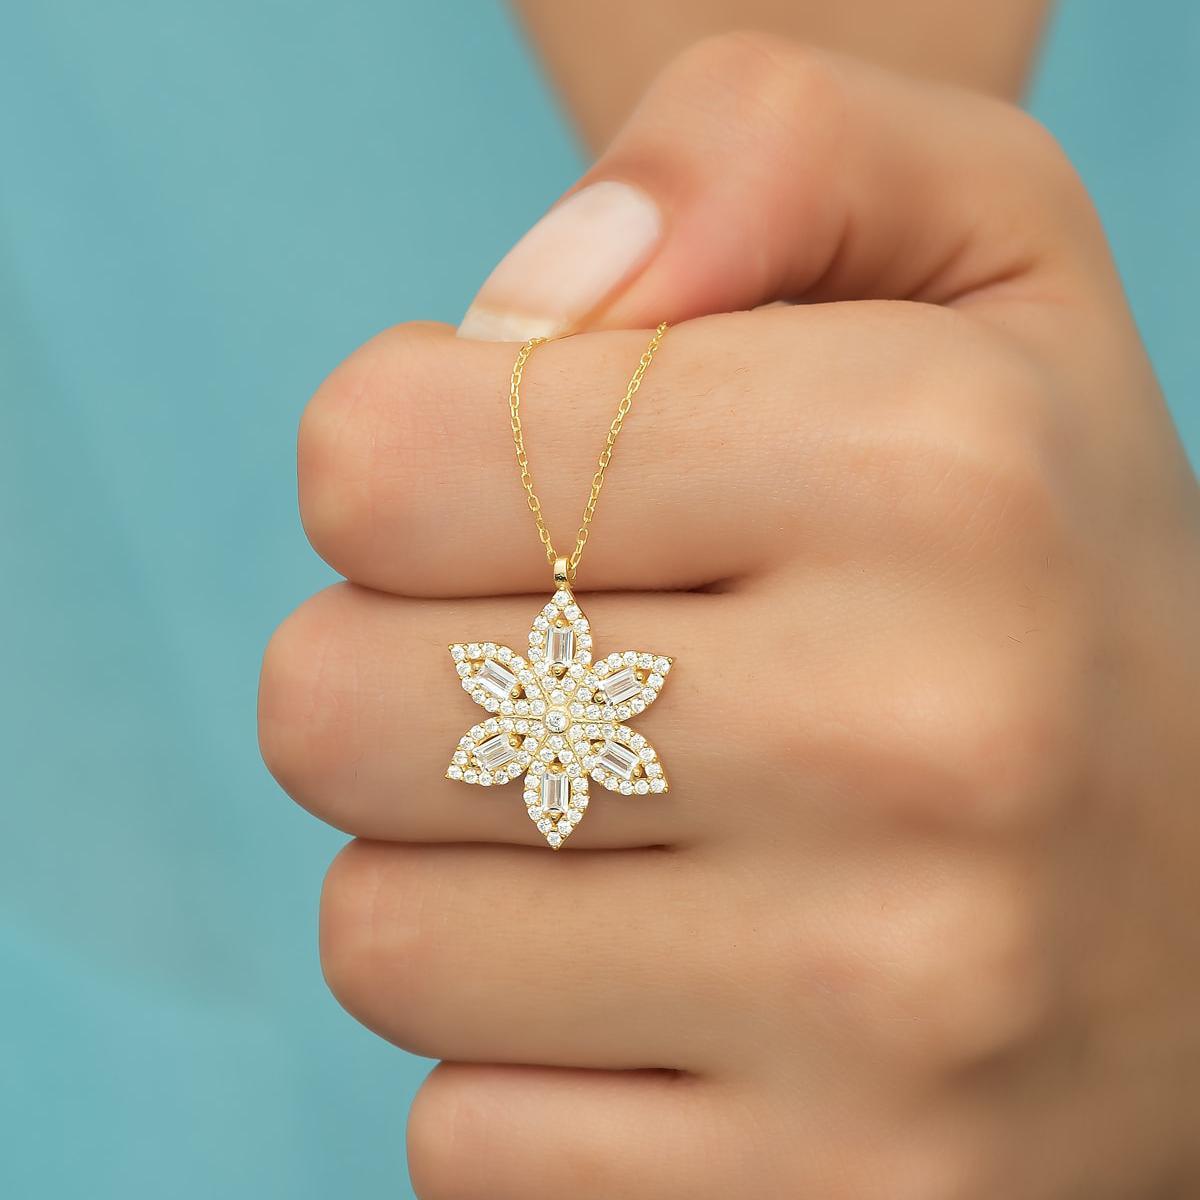 Diamond Flower Necklace • Sunflower Necklace • Flower Necklace Gold - Trending Silver Gifts